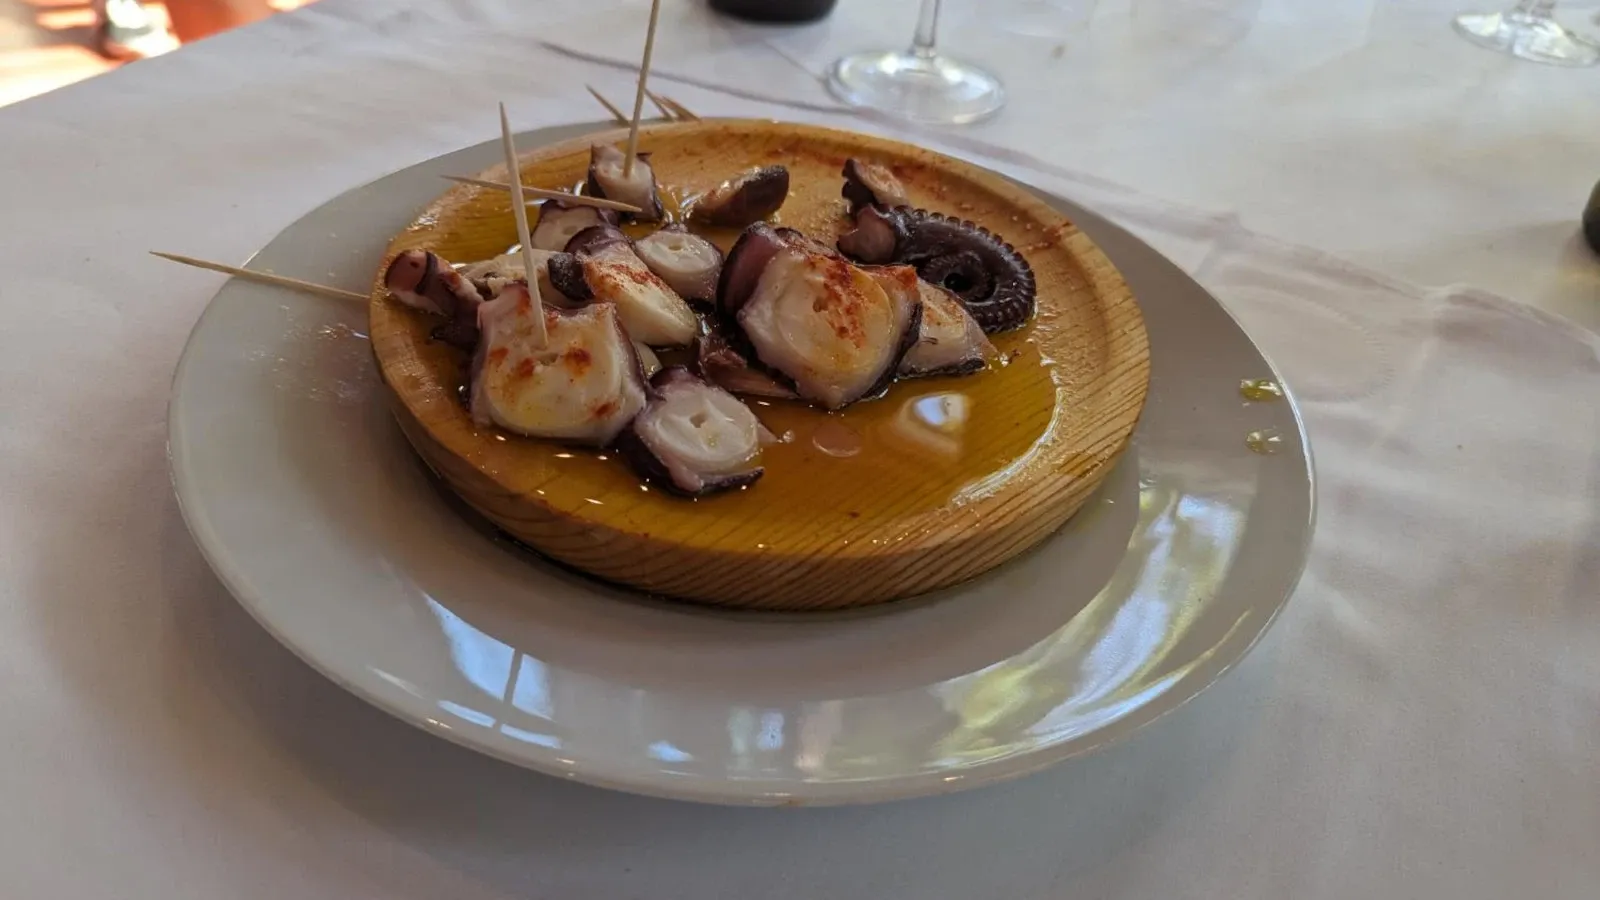 Octopus dish, one of the various tapas served during the conference.